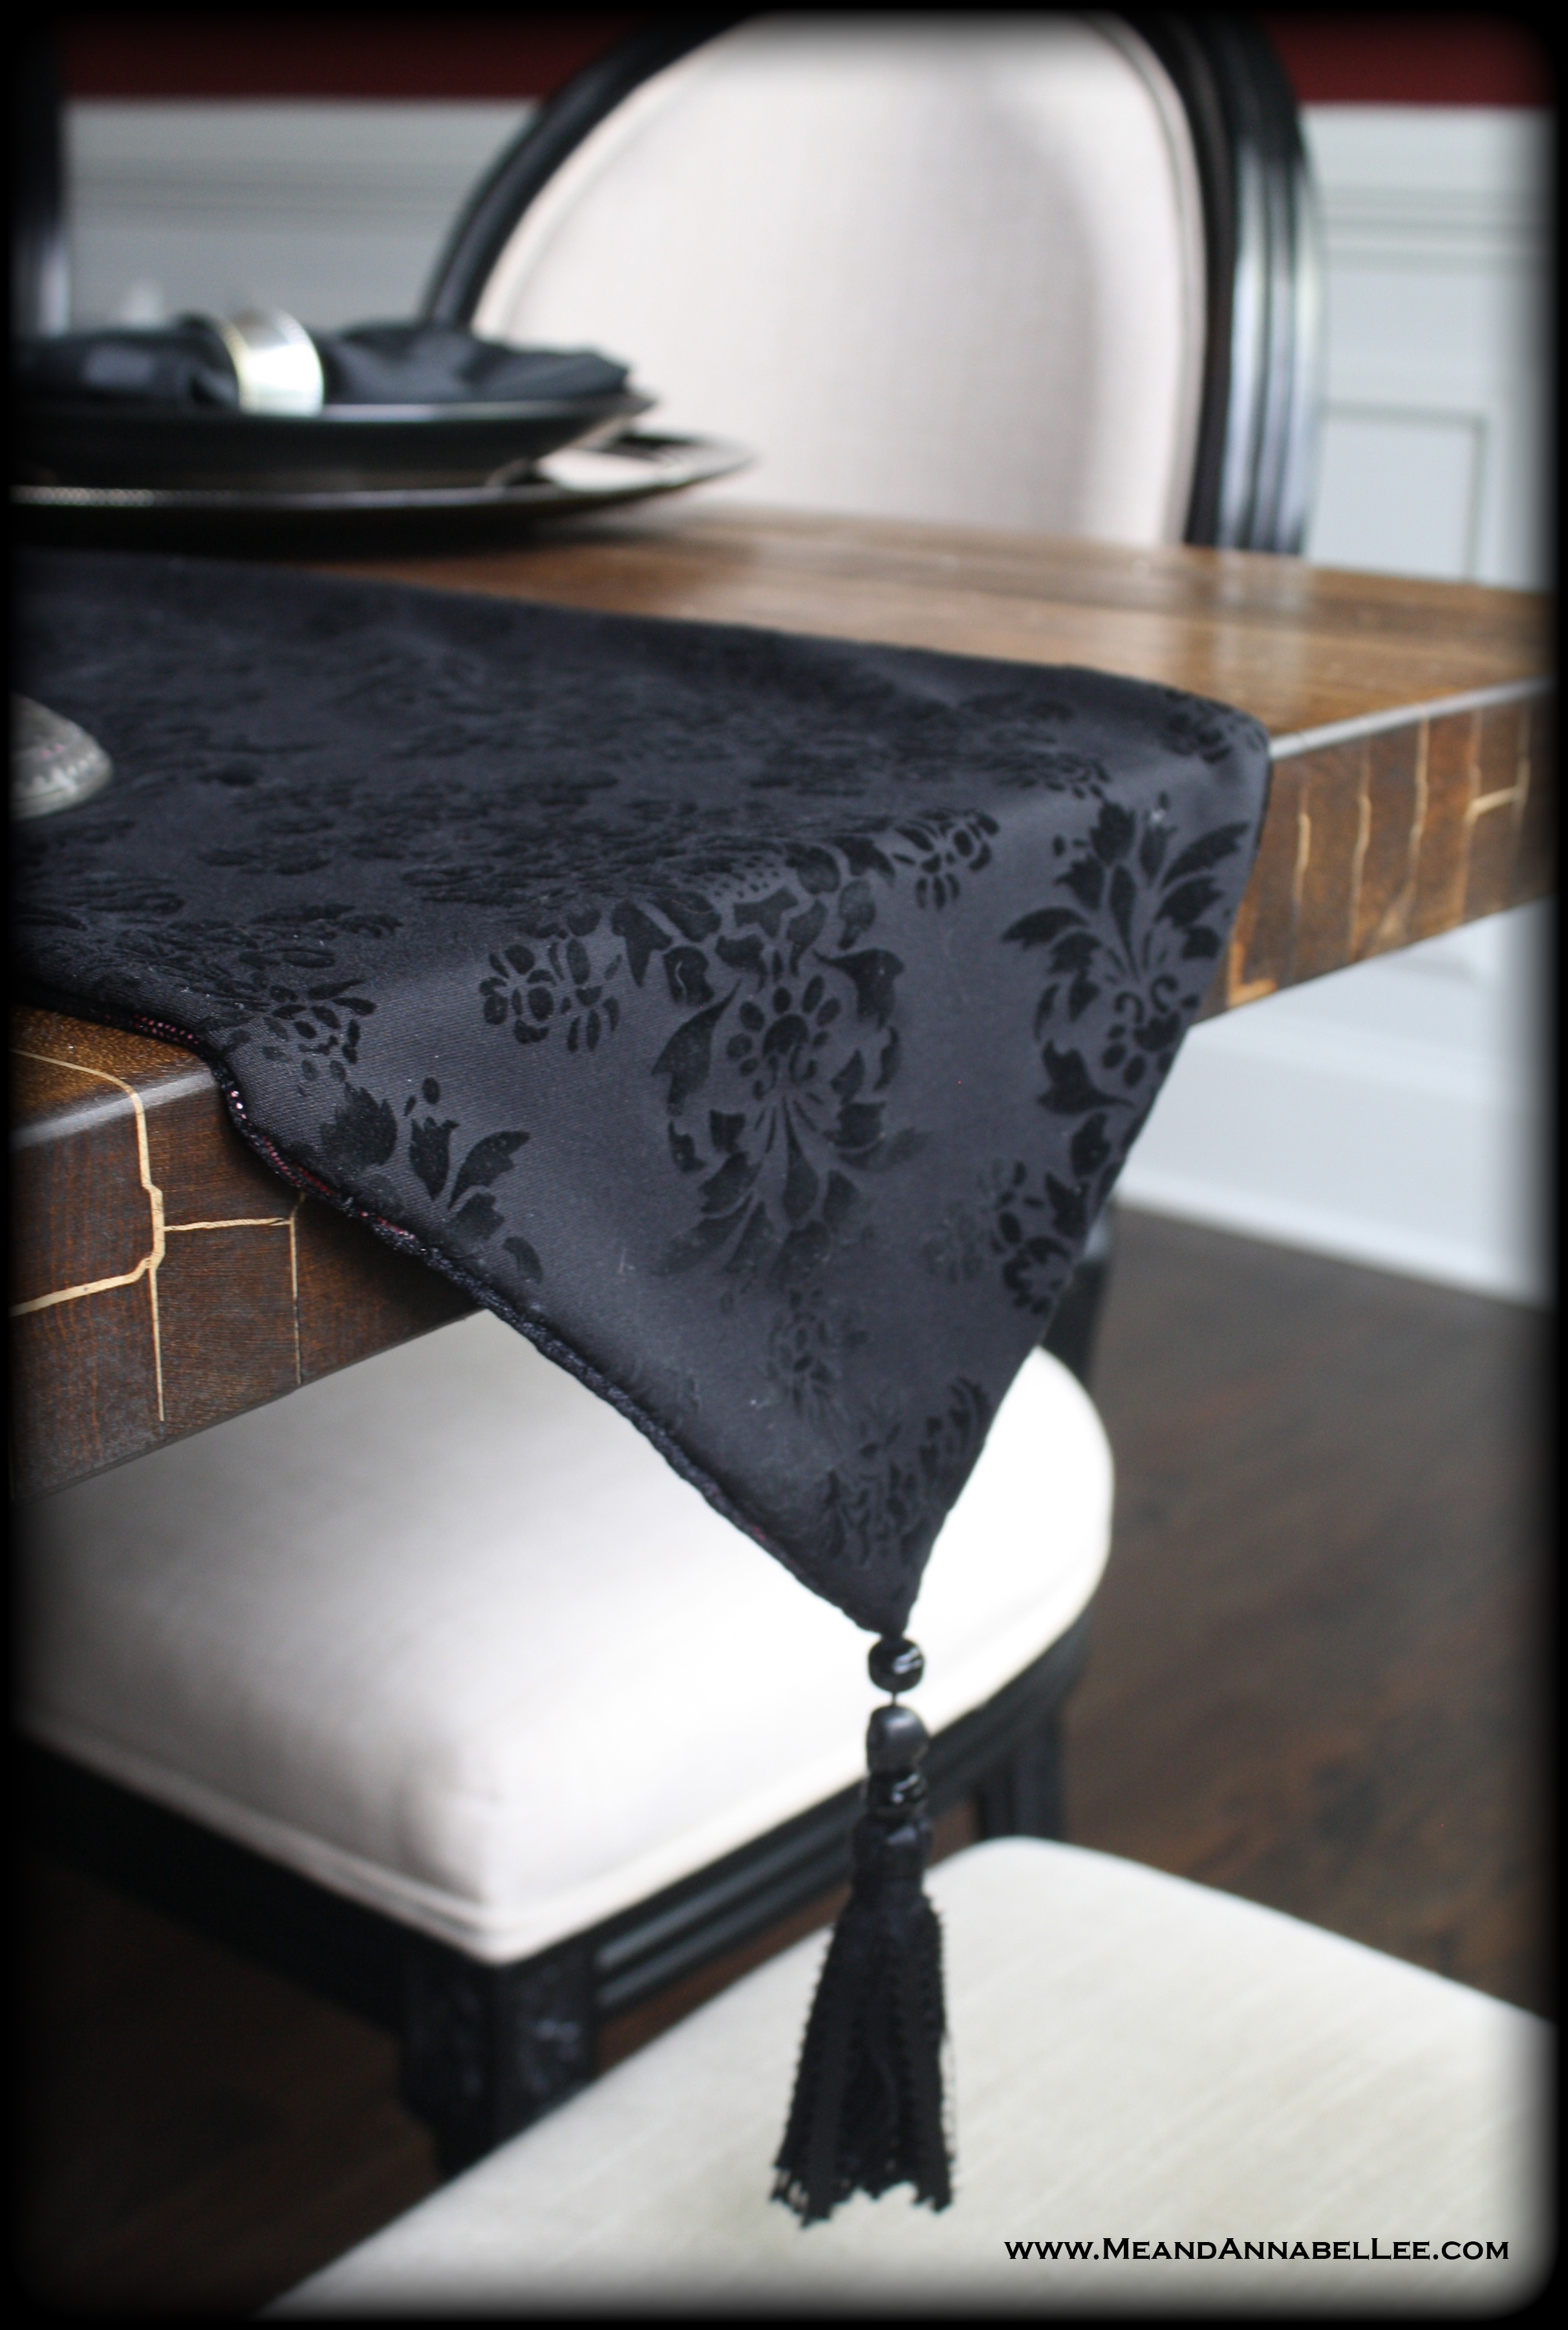 How to Make this DIY Double Sided Victorian Gothic Table Runner | Reversible | Black Flocked Velvet Damask | Black Skull Tassel | Goth Home Decor | Gothic Sewing Project | Table Setting | www.MeandAnnabelLee.com